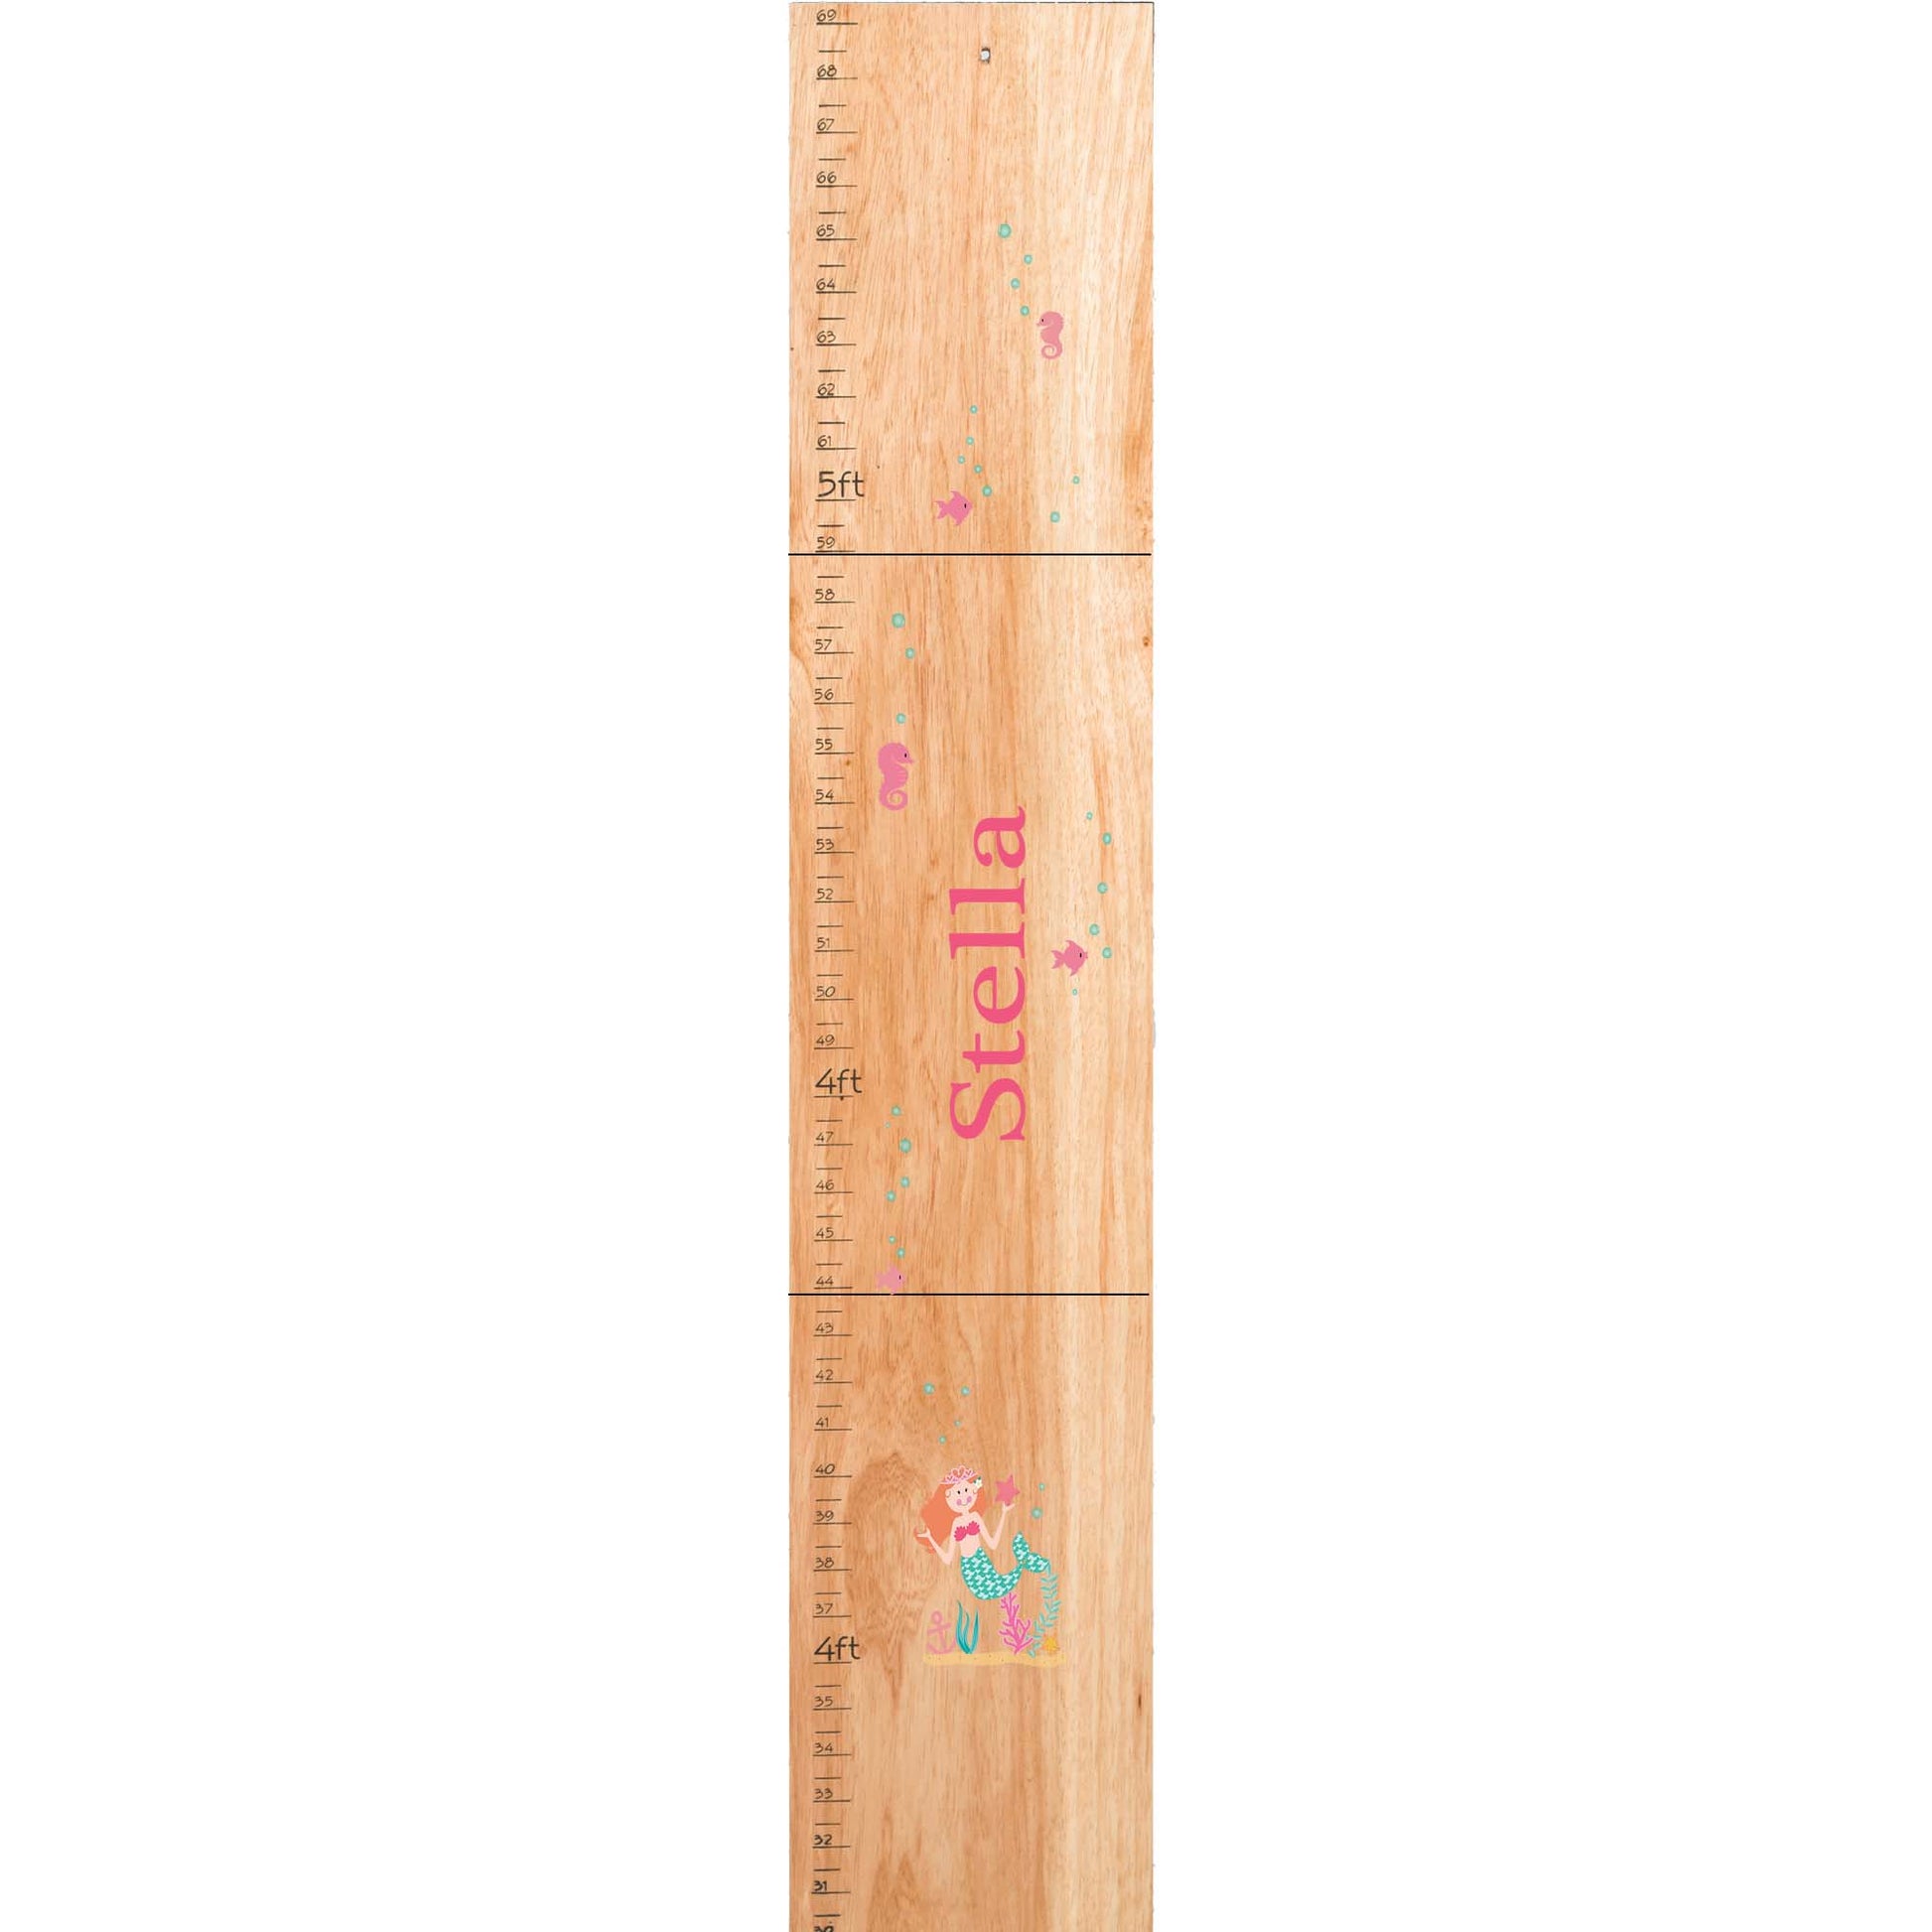 Personalized Natural Growth Chart With Mermaid Red Hair Design